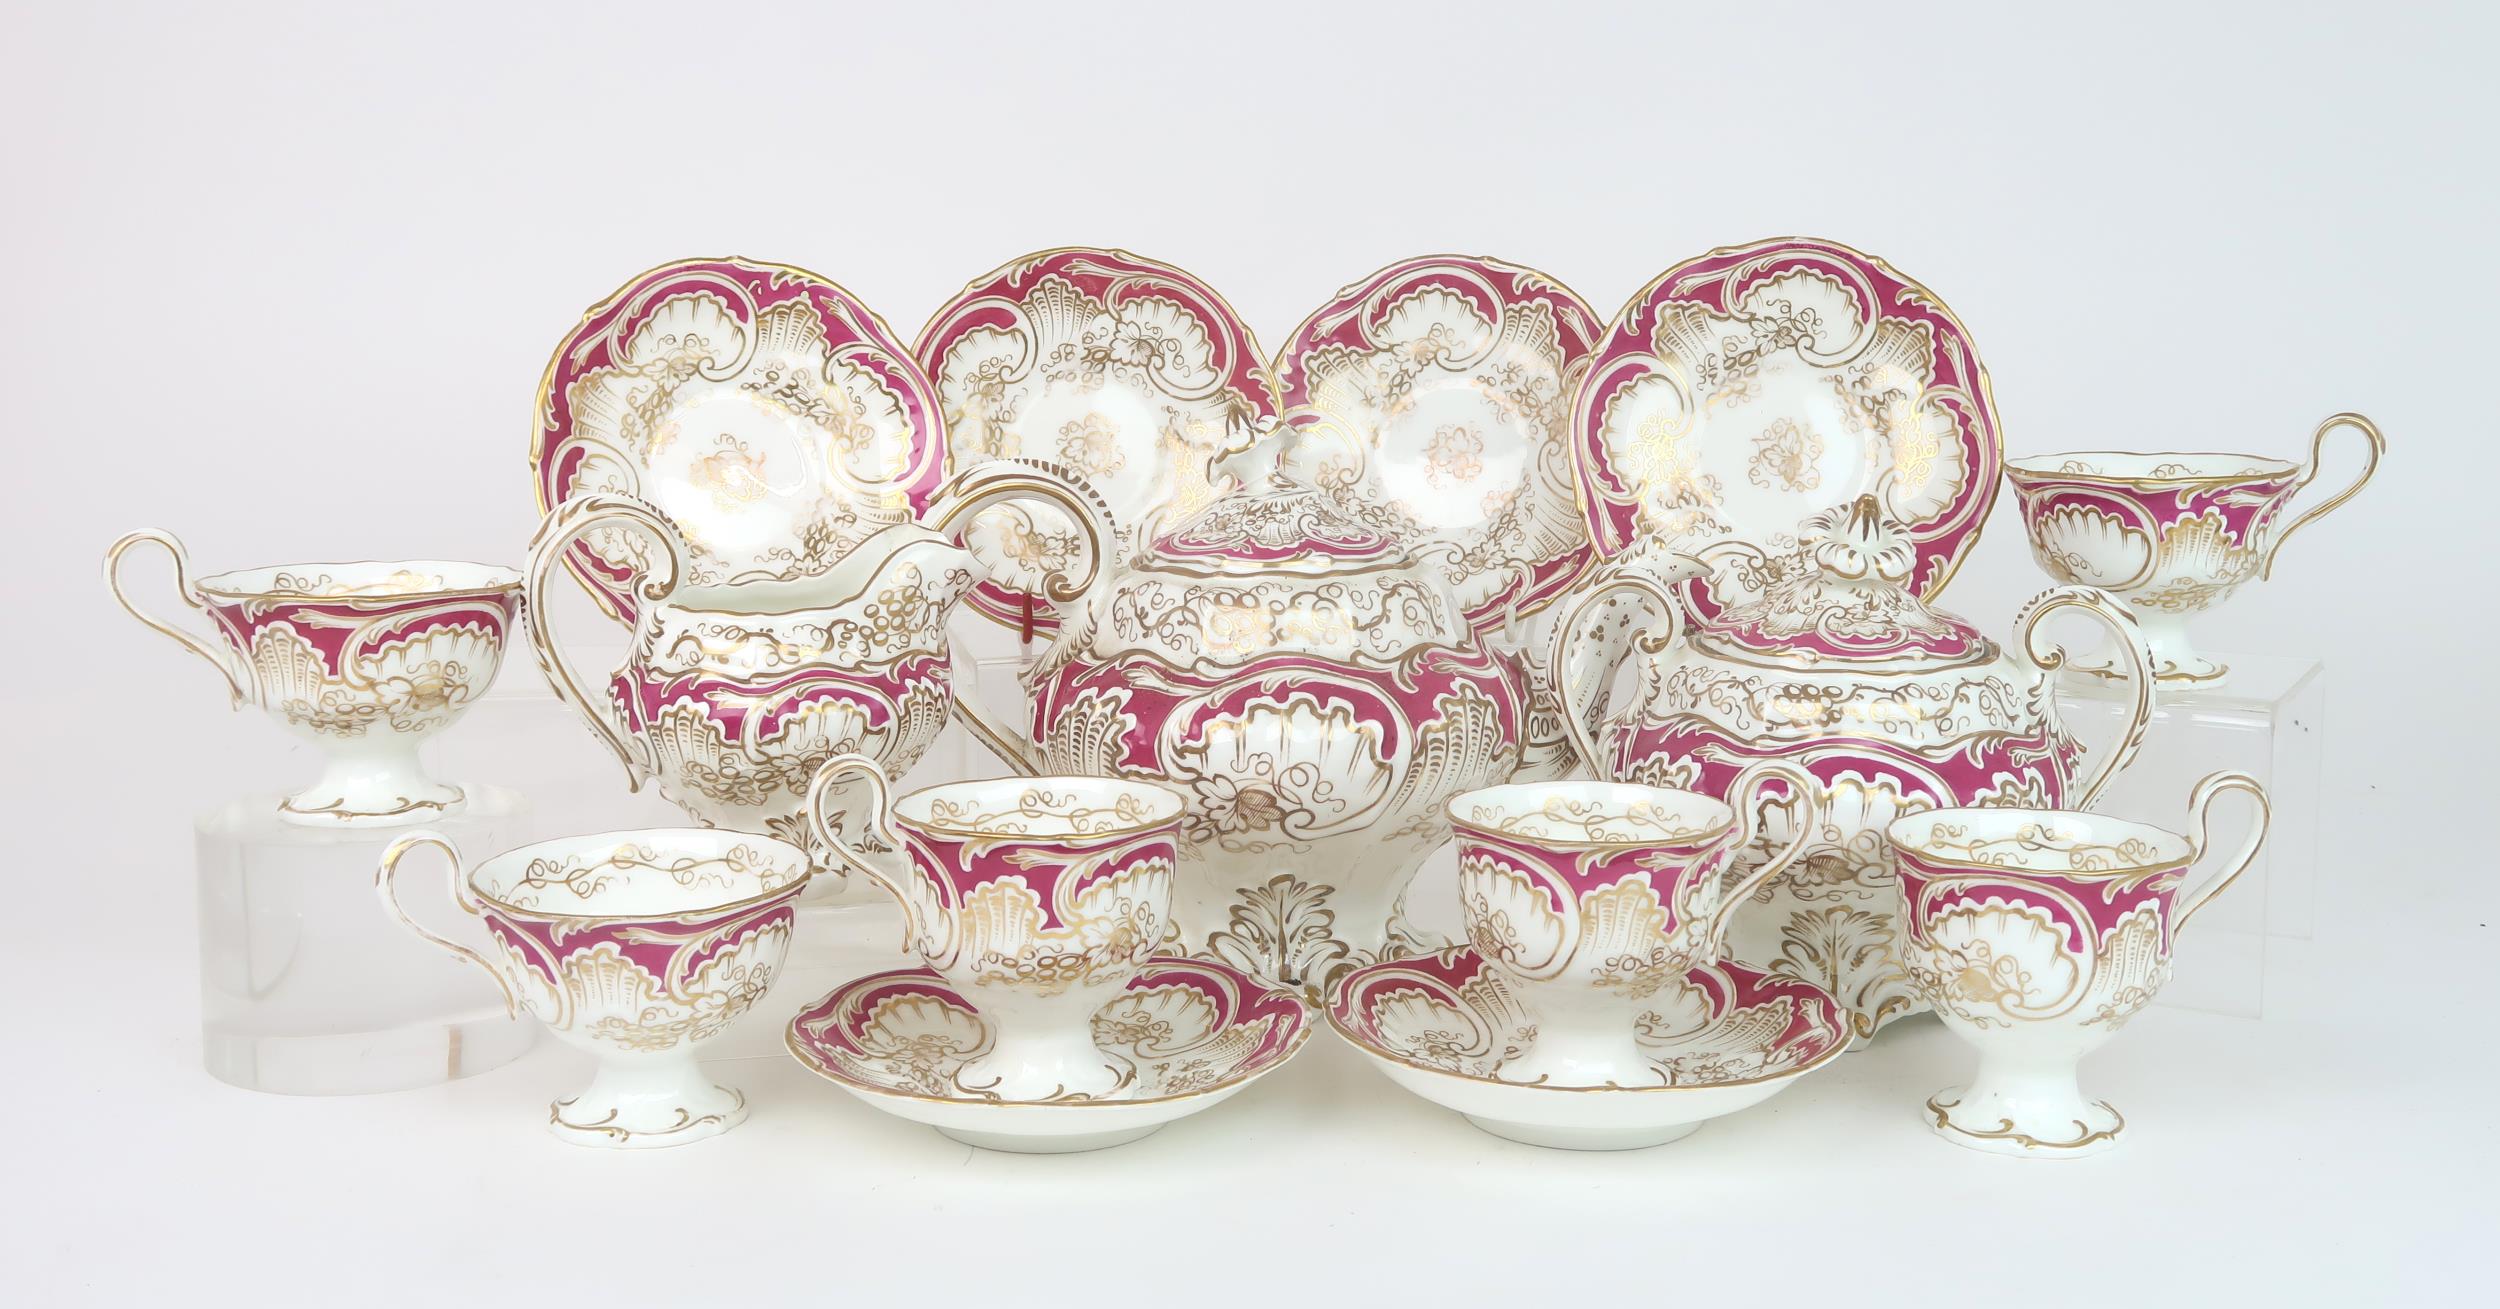 A ROCKINGHAM STYLE TEASET of moulded rococo design, the white ground with gilt vine and grape